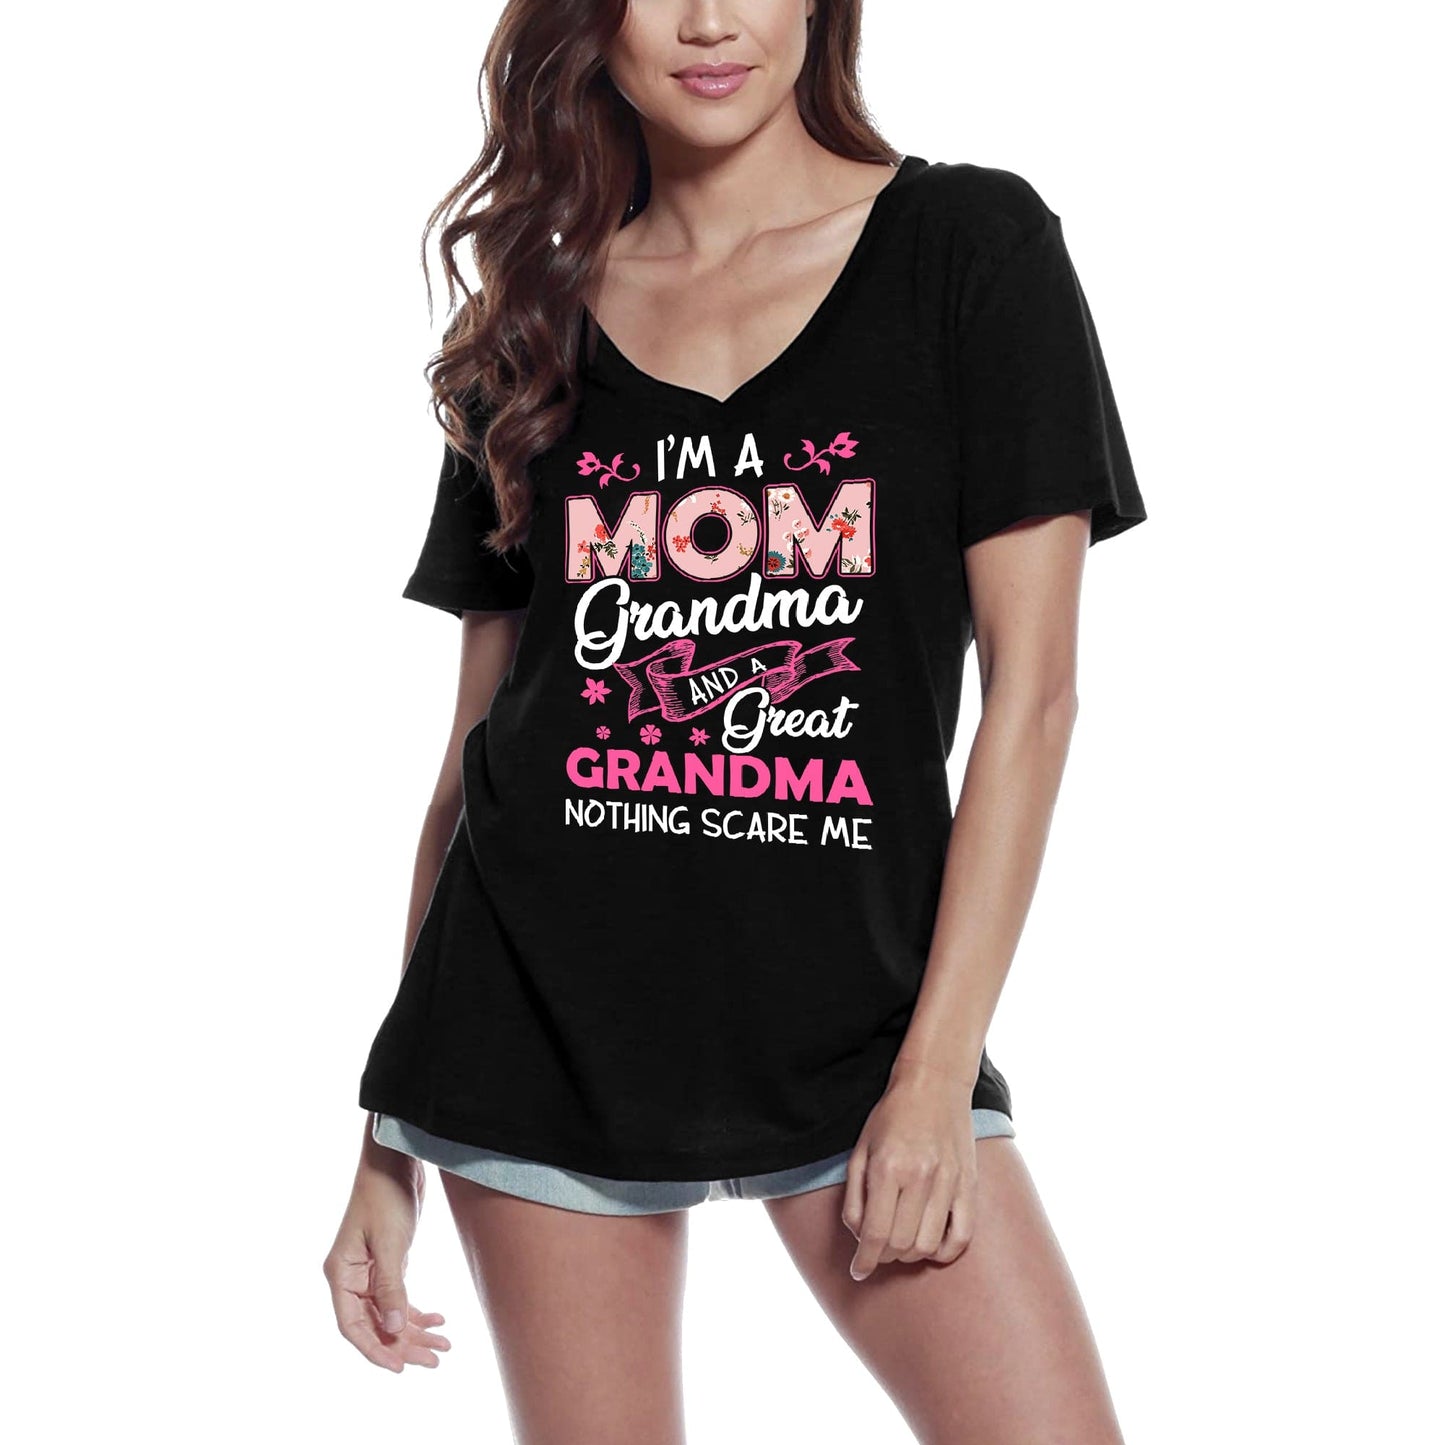 ULTRABASIC Women's T-Shirt I'm a Mom Grandma and a Great Grandma Nothing Scares Me